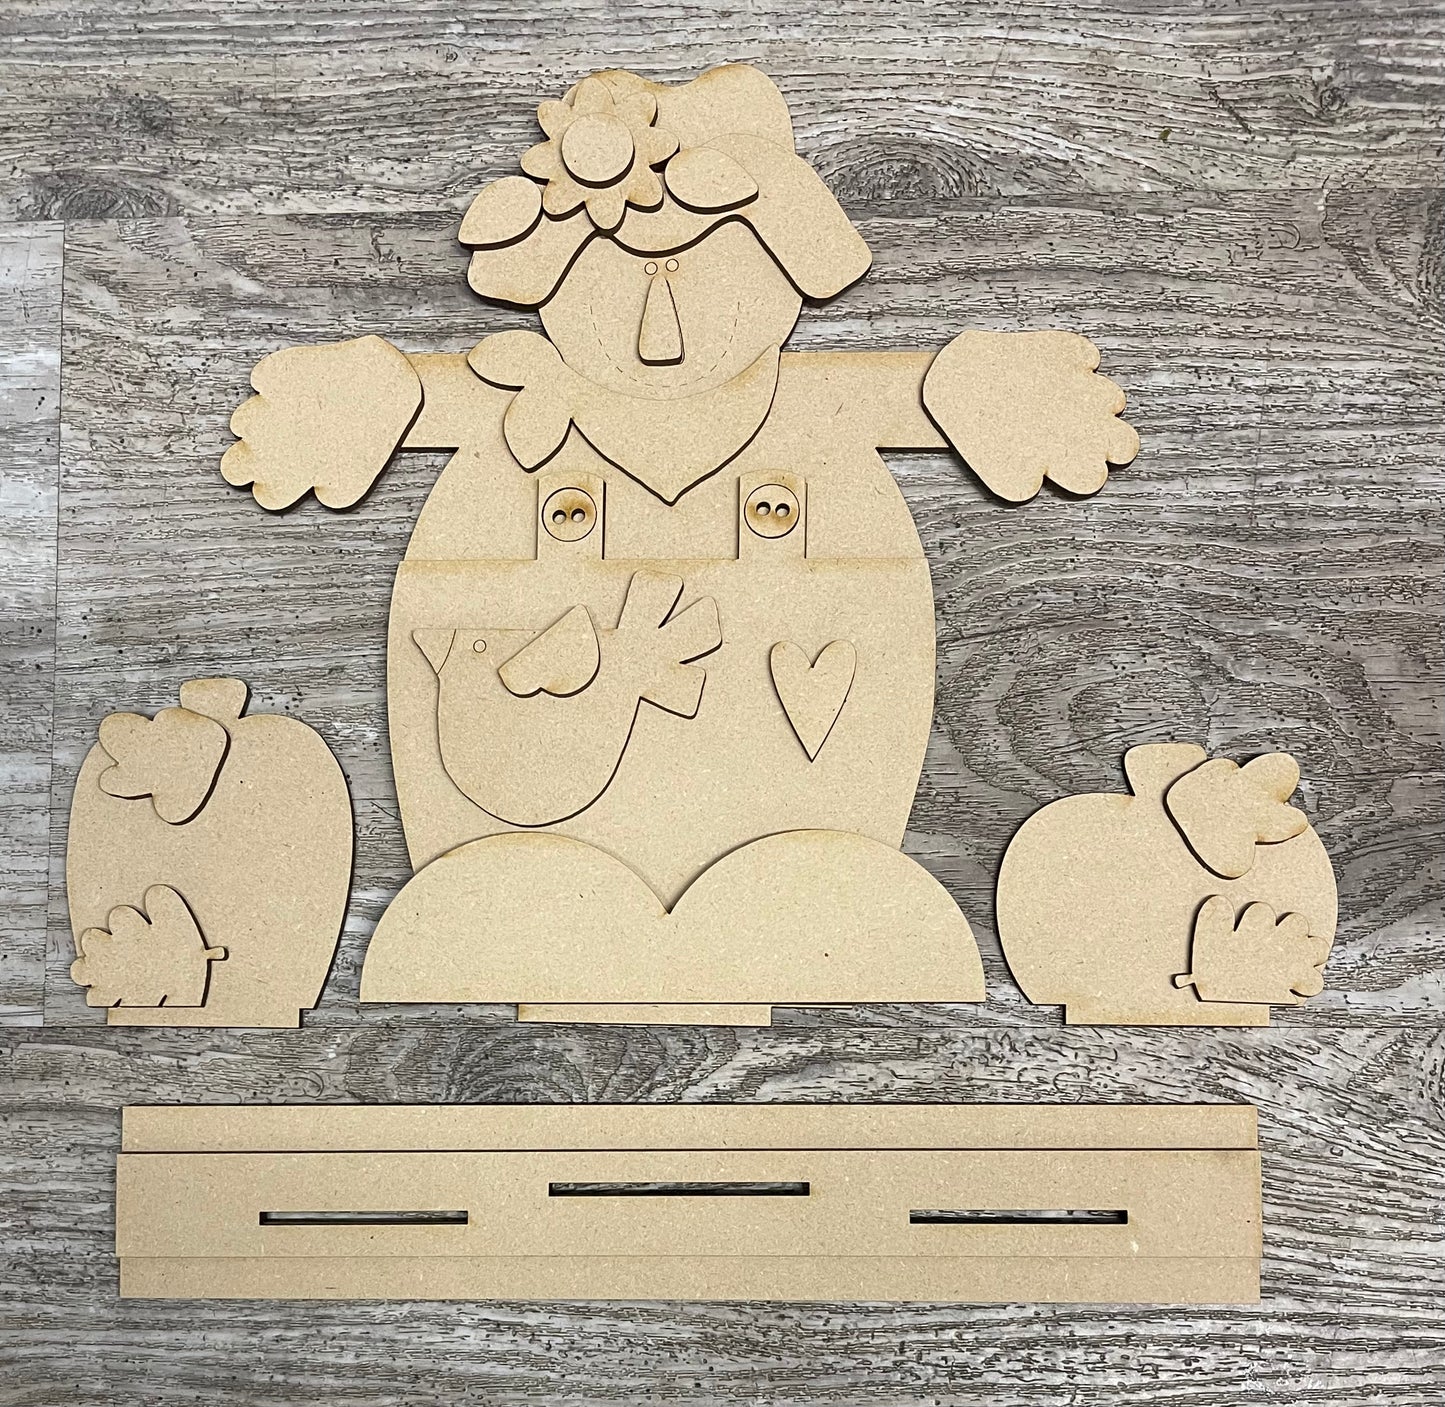 Scarecrow standing grouping cutout,unpainted wooden cutout - ready for you to paint